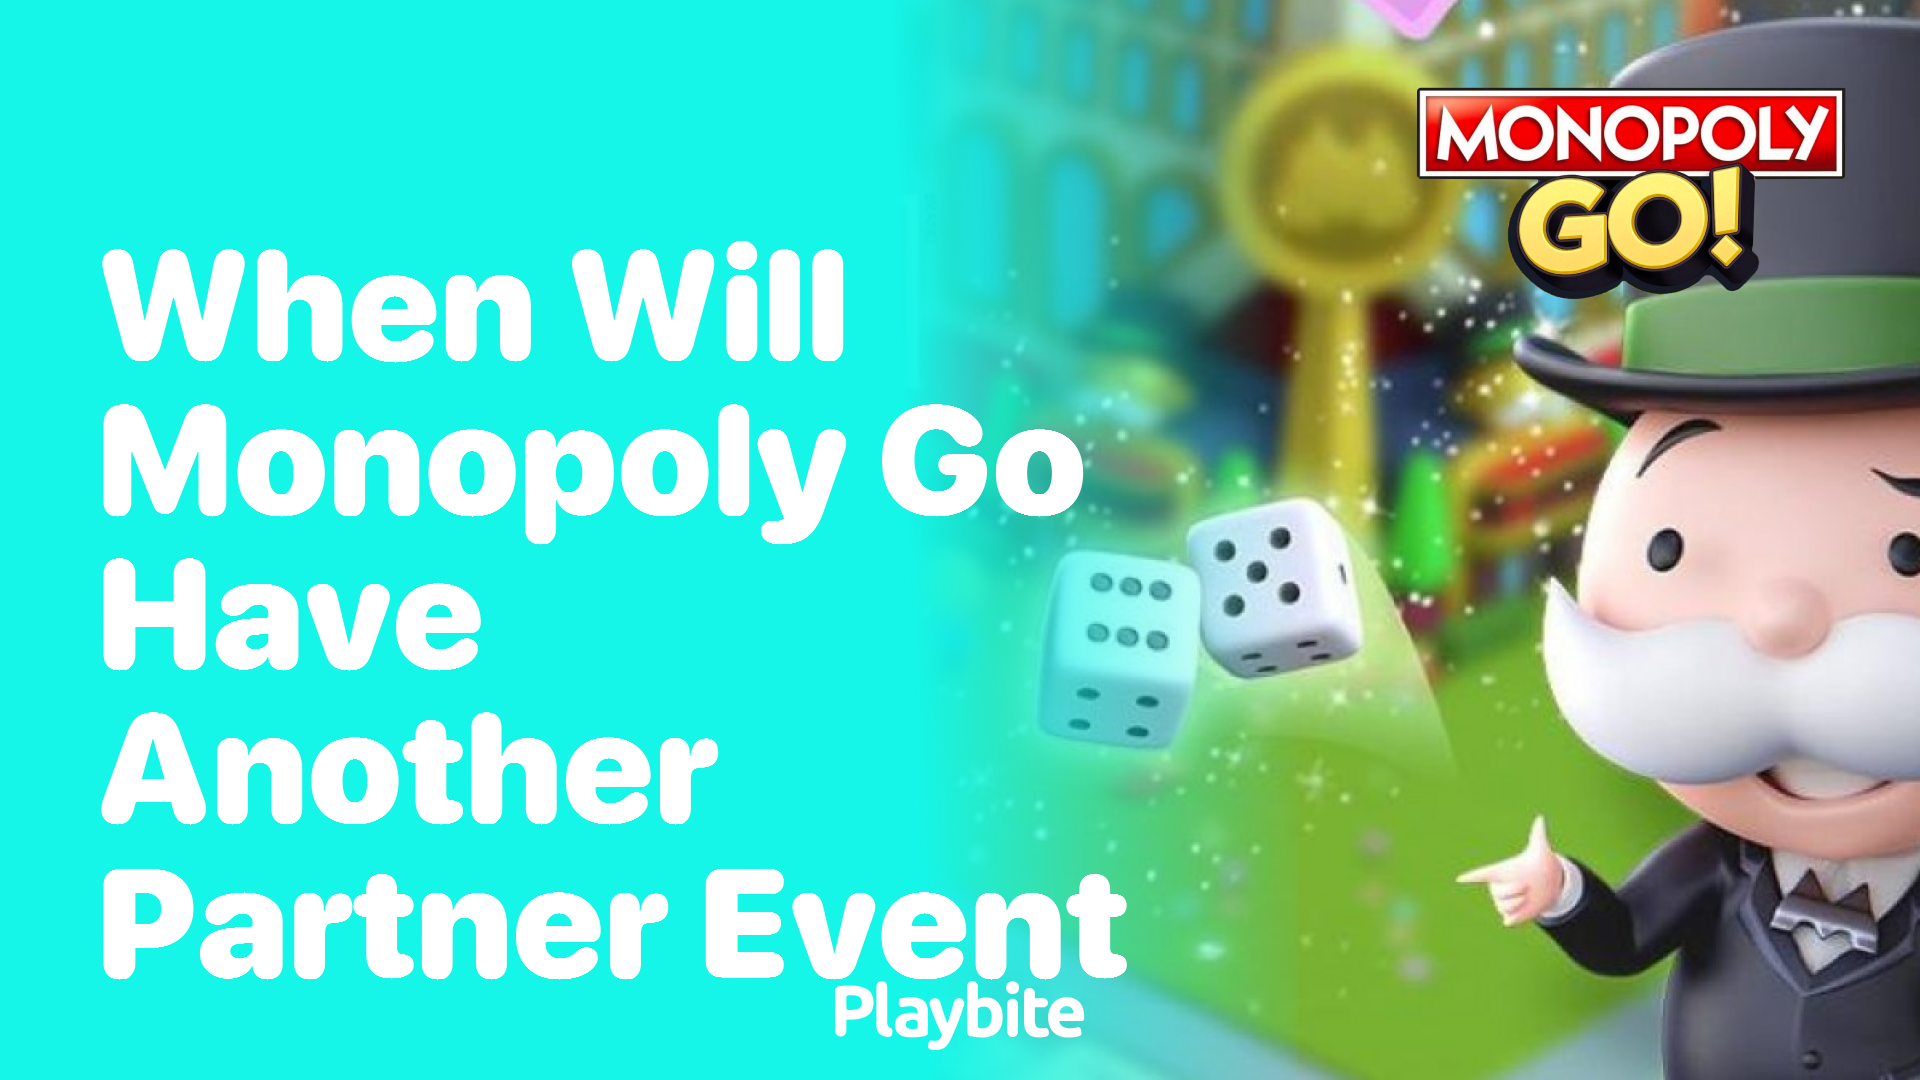 When Will Monopoly Go Have Another Partner Event?